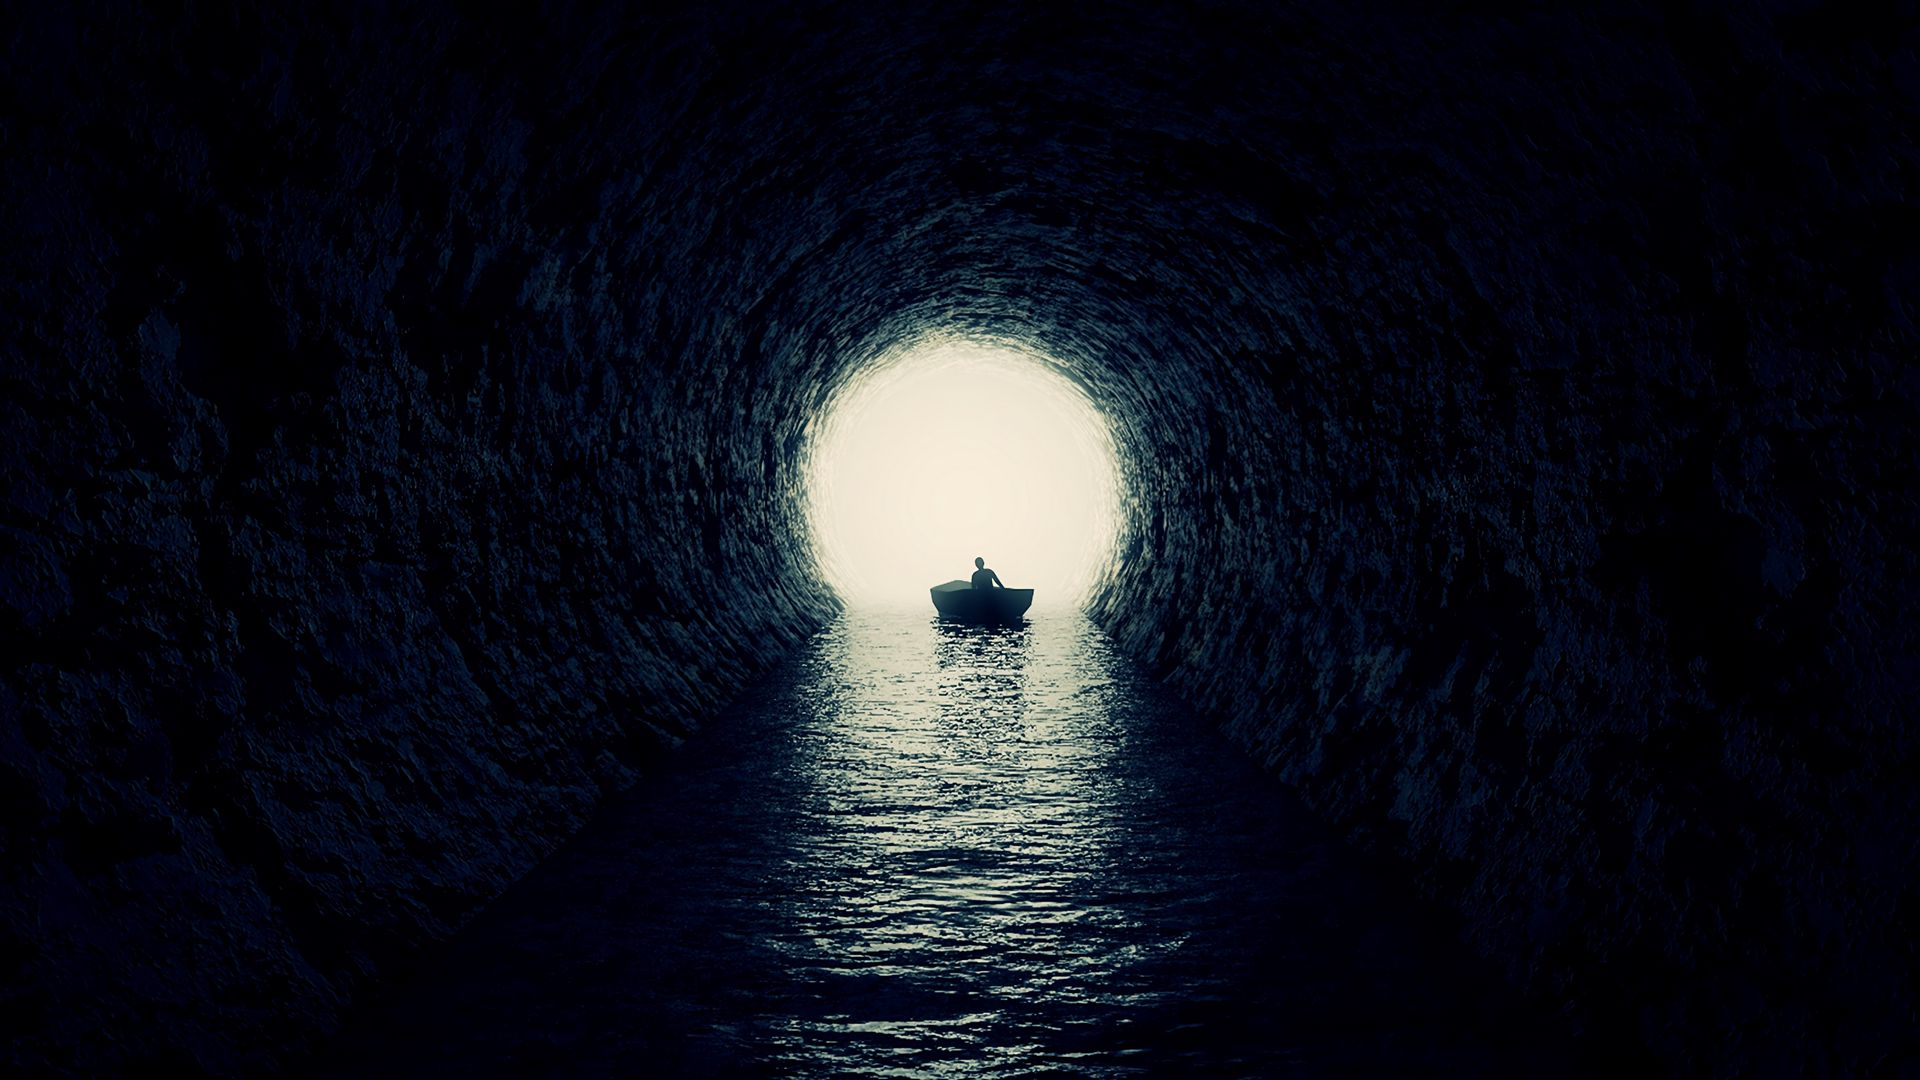 https://images.wallpaperscraft.com/image/single/cave_boat_silhouette_137626_1920x1080.jpg